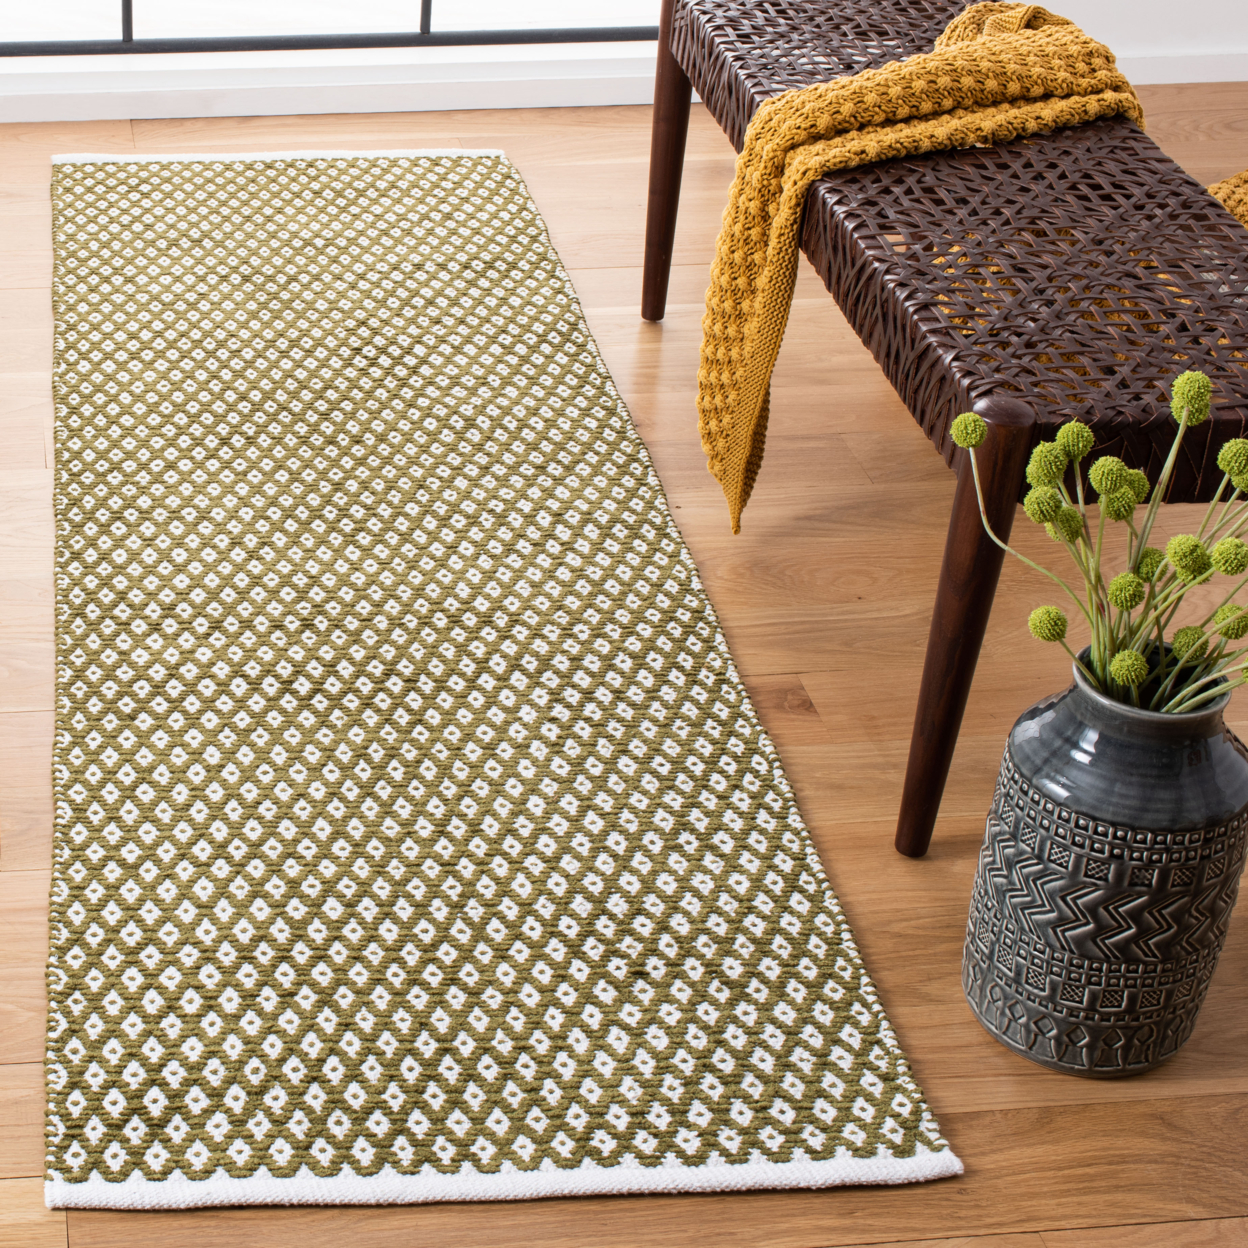 SAFAVIEH Boston Collection BOS685B Handwoven Olive Rug - 4' Square